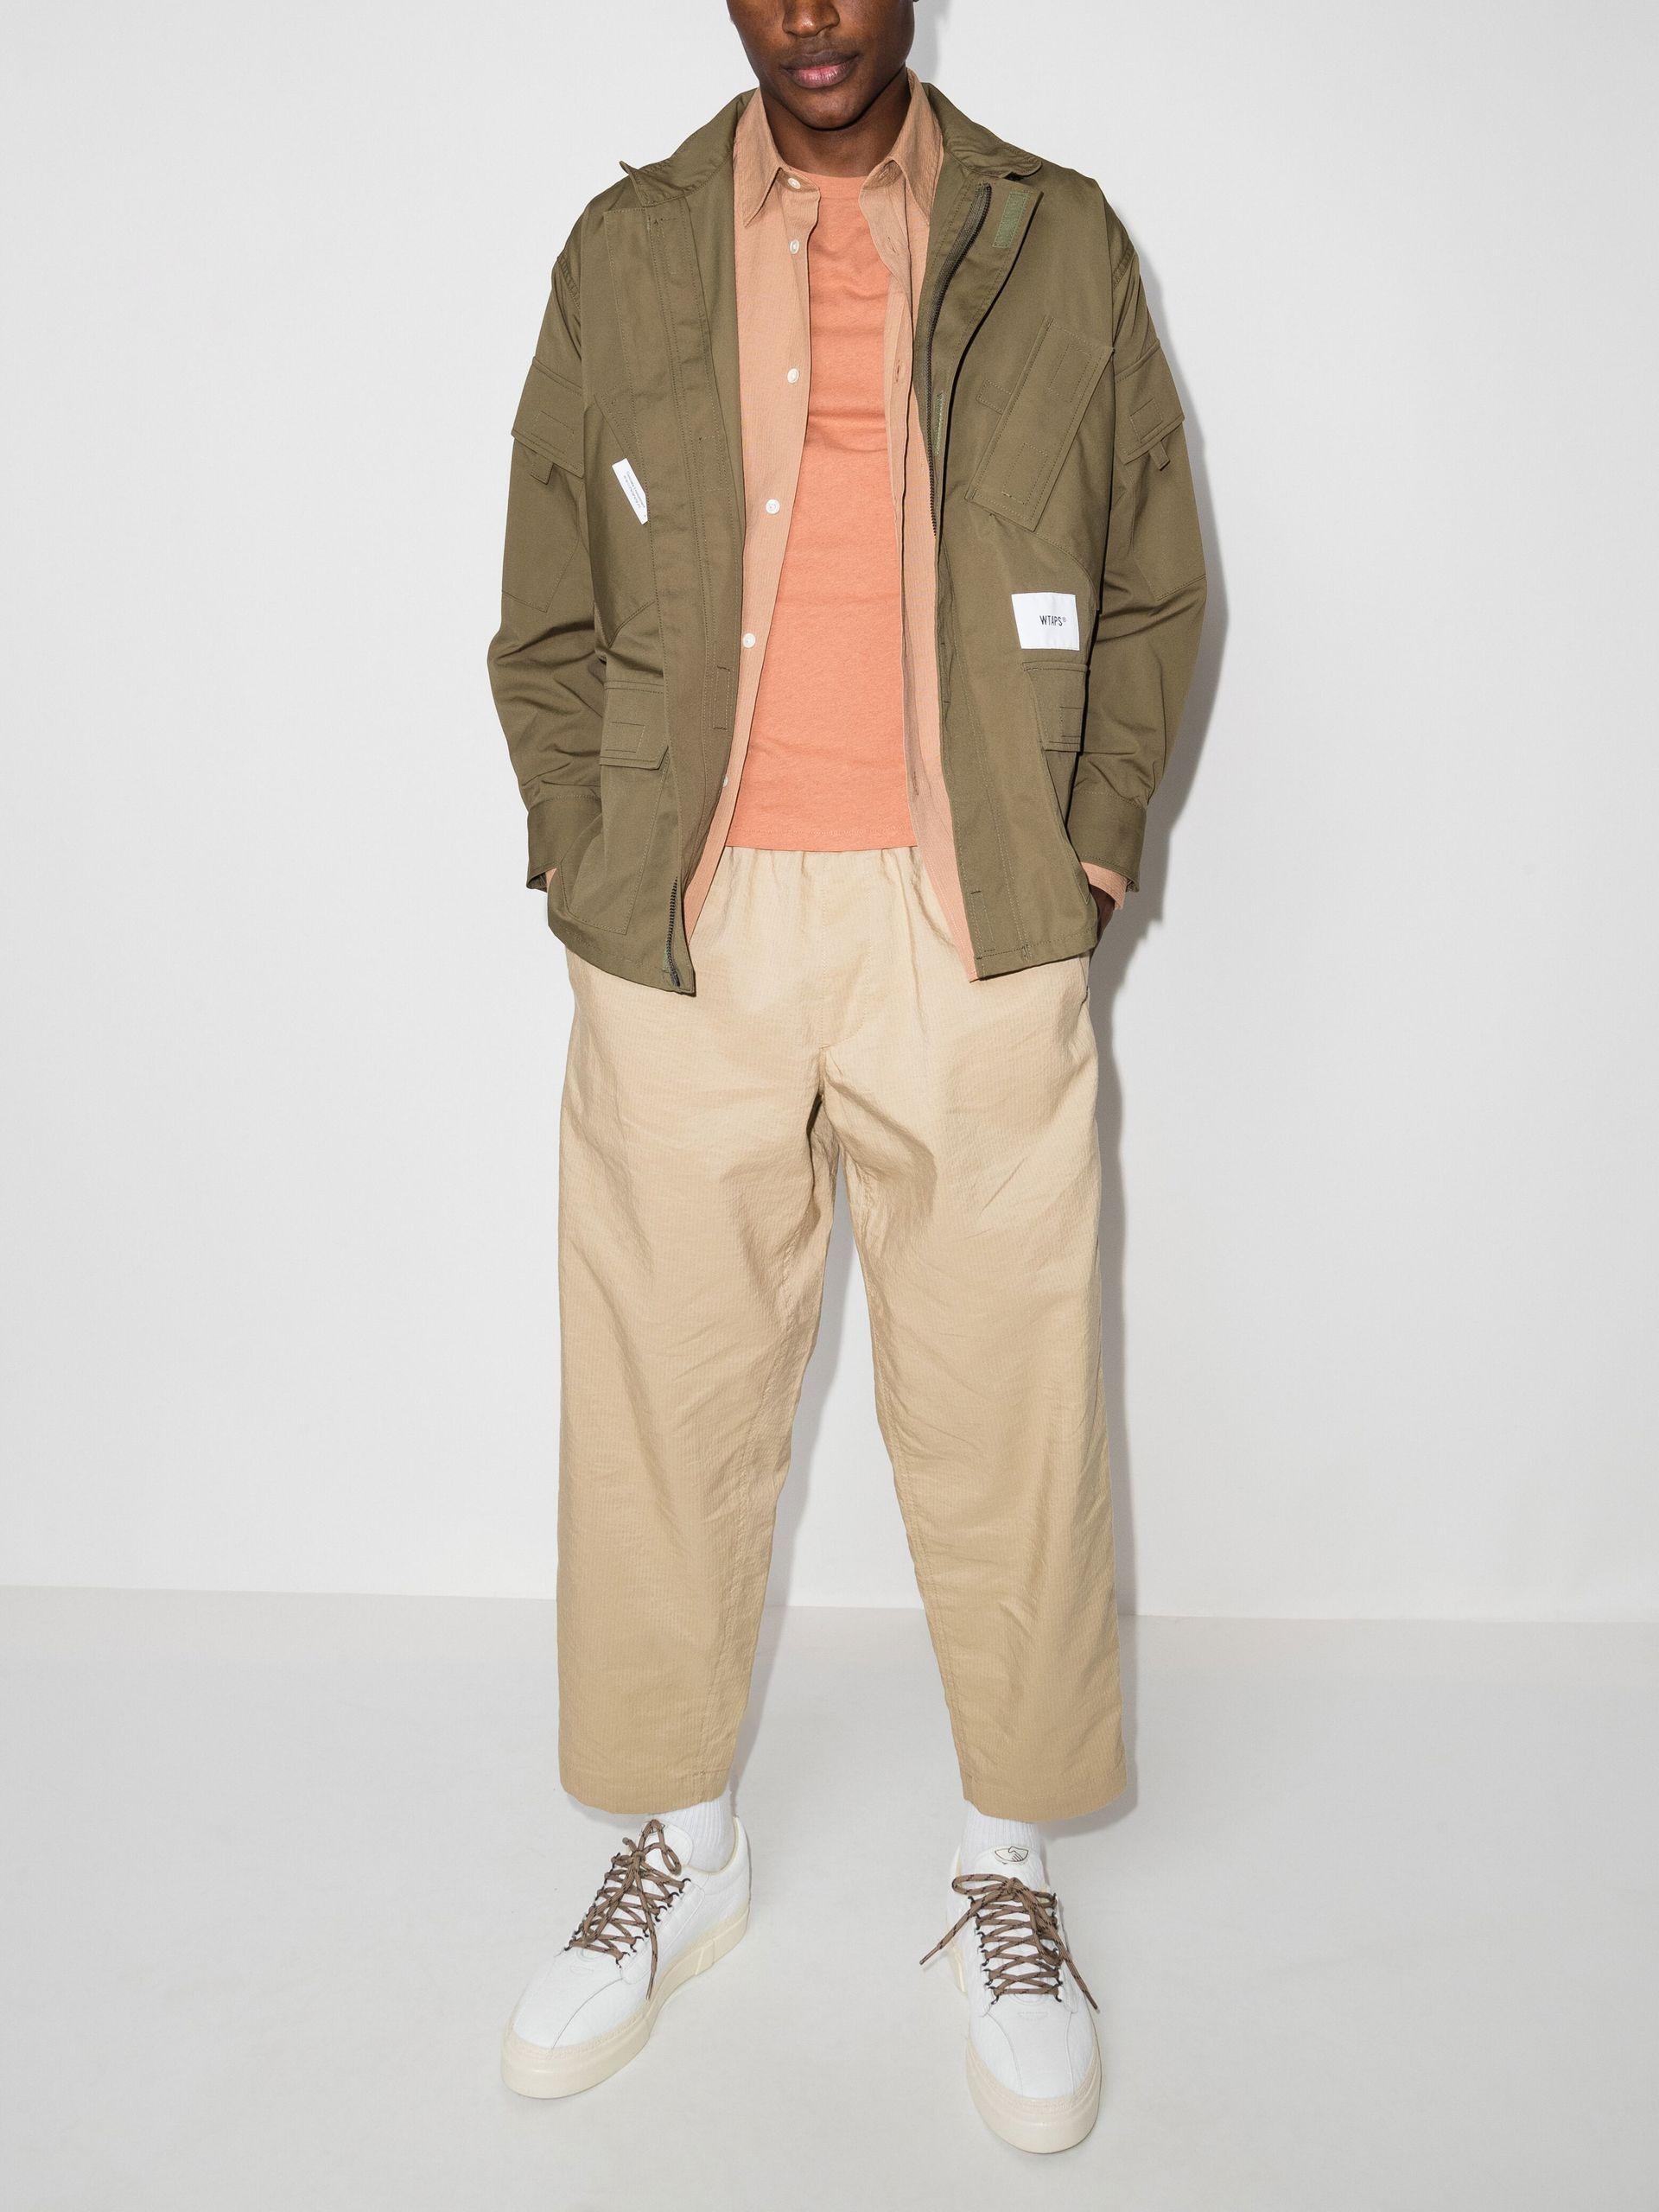 WTAPS Men's Green Conceal Military Jacket